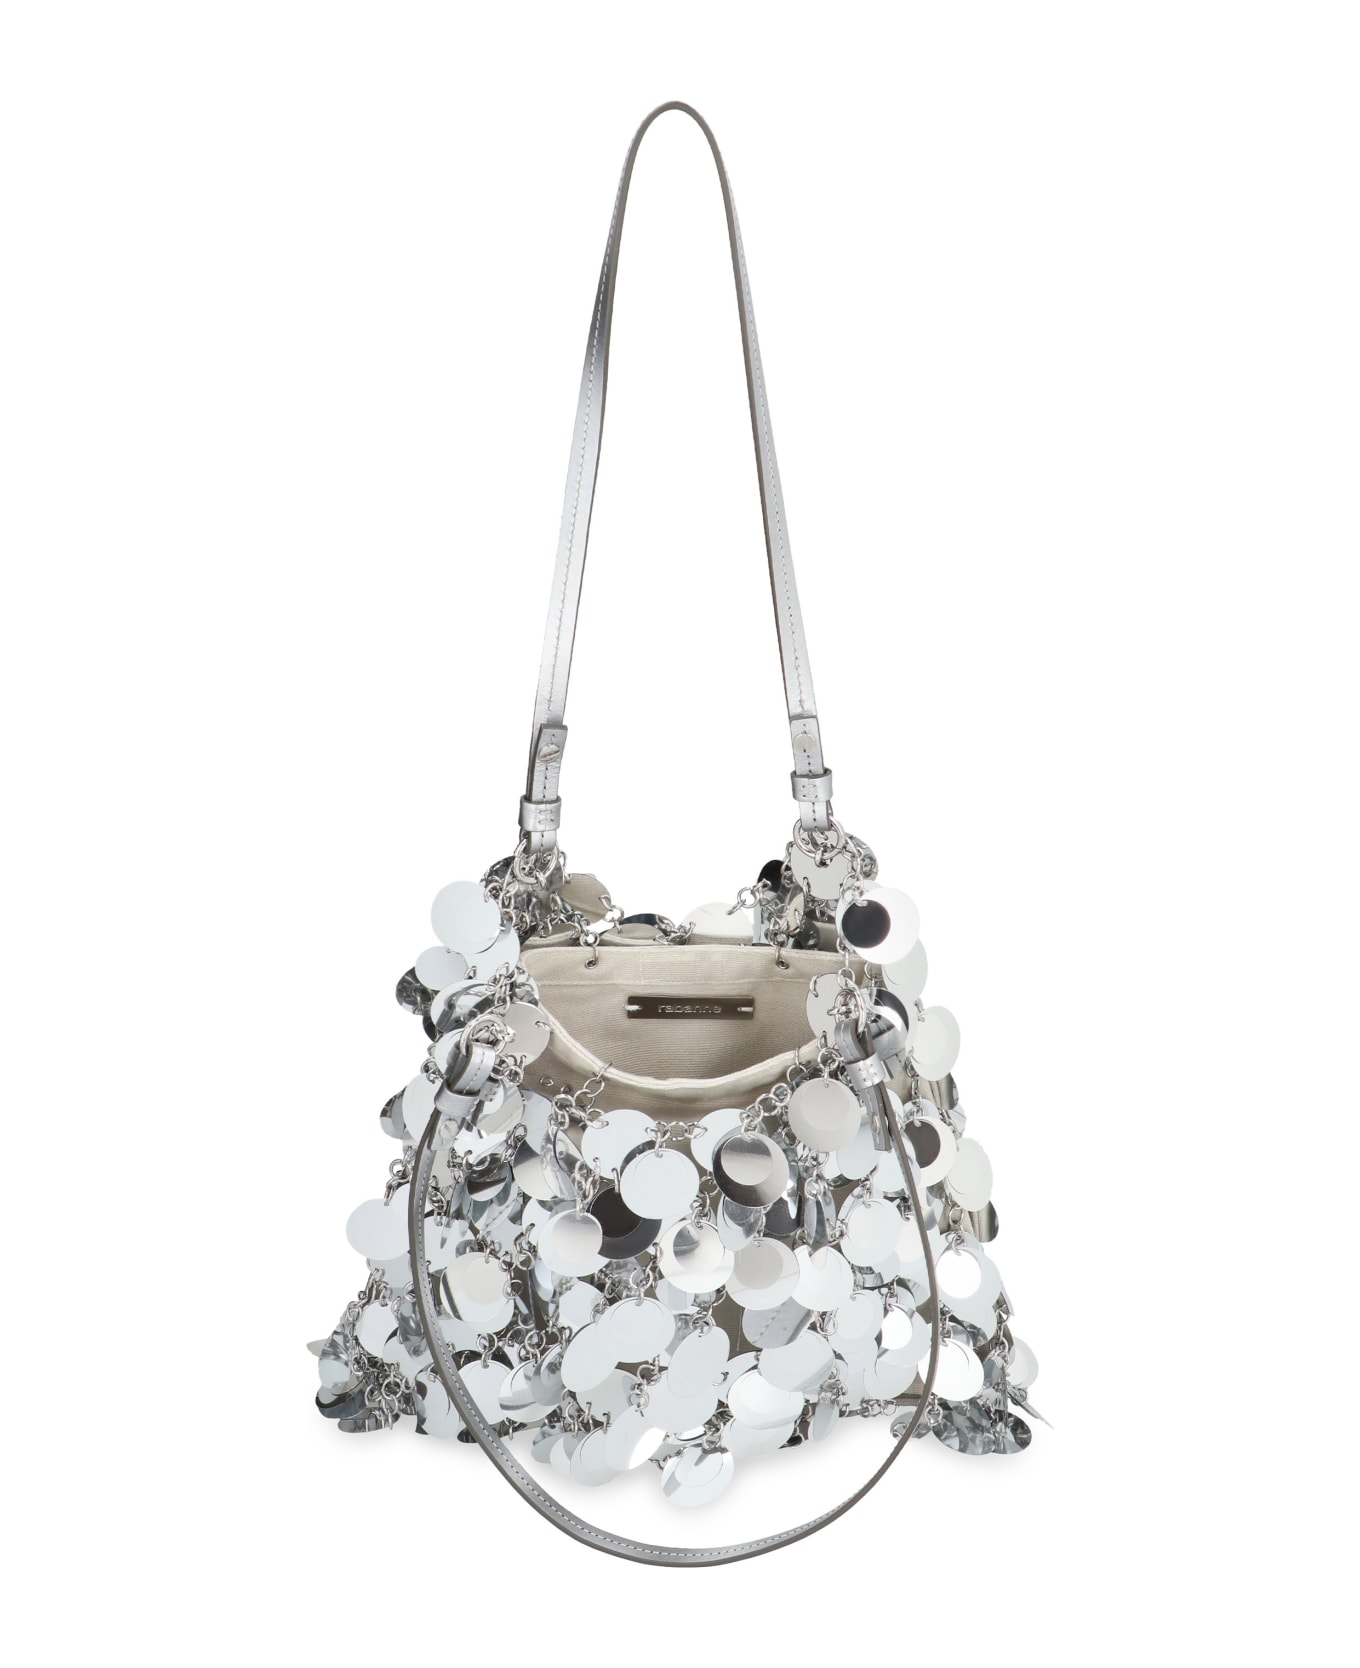 Paco Rabanne Sparkles Tote Bag - silver ショルダーバッグ